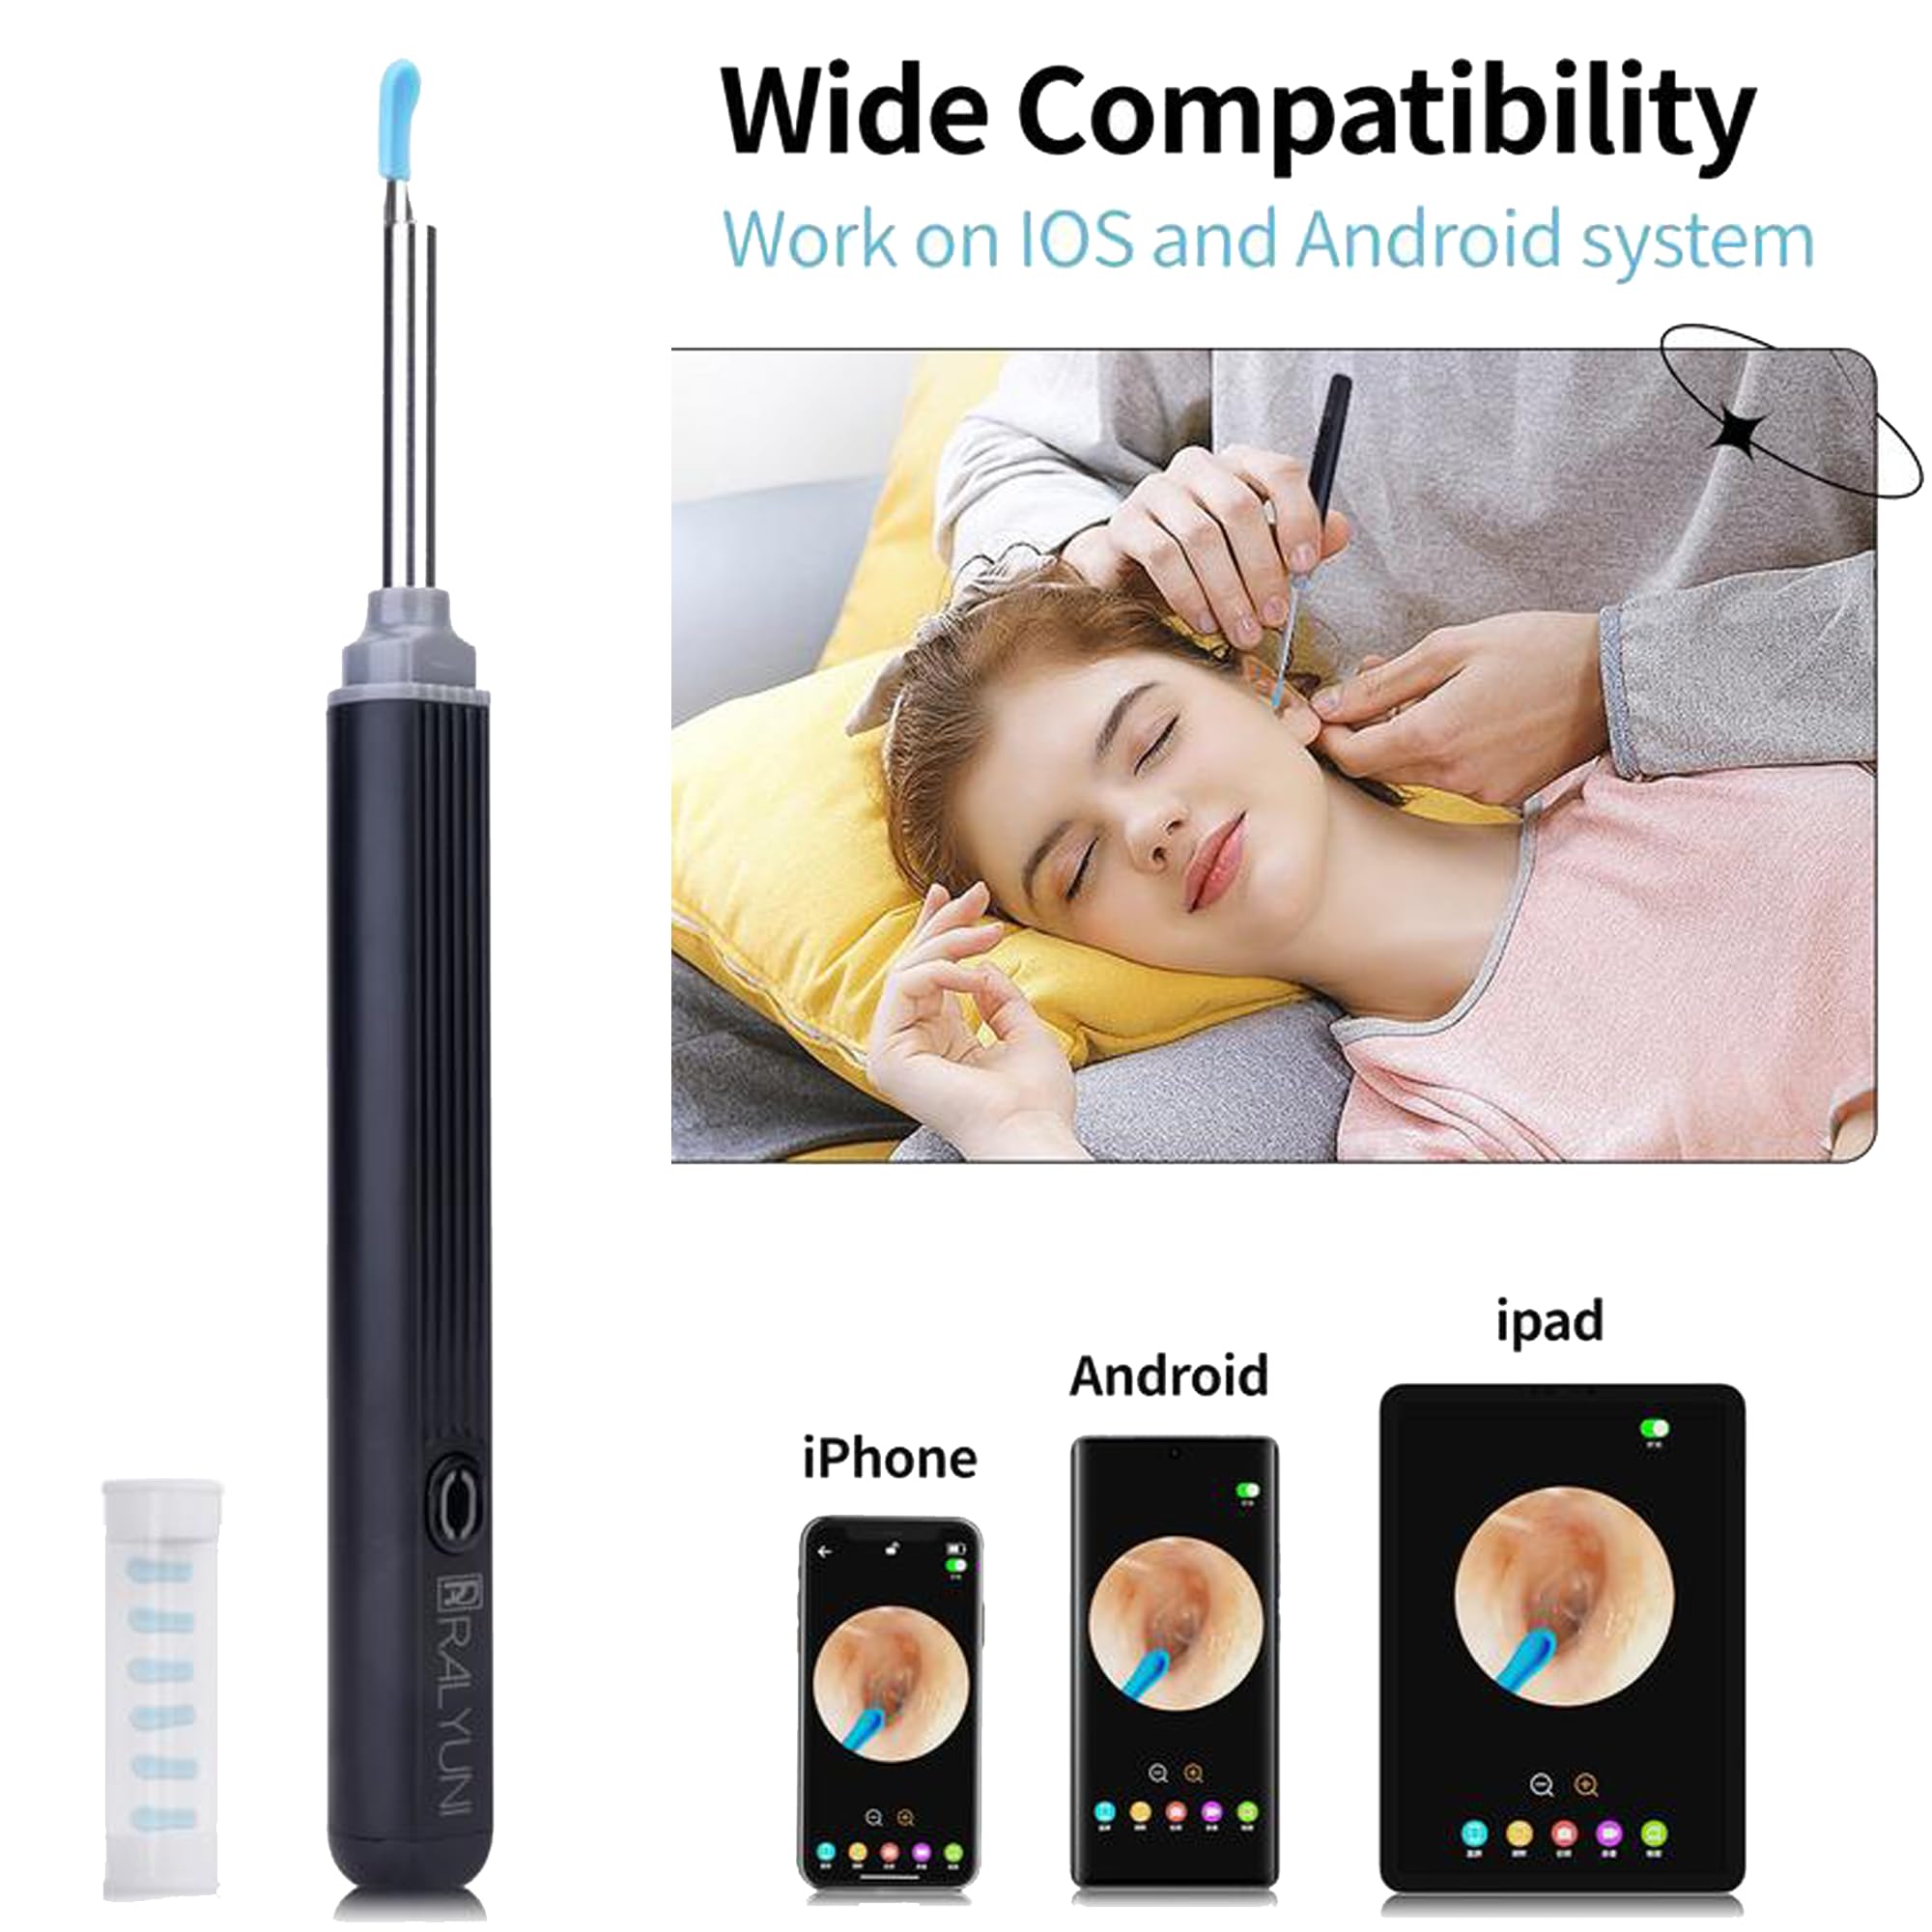 Ear Wax Removal with Camera, Earwax Remover Tool,1080 HD Wireless Ear Otoscope with 6 LED Lights Ear Wax Removal Kit for iPhone, iPad & Android Smart Phone